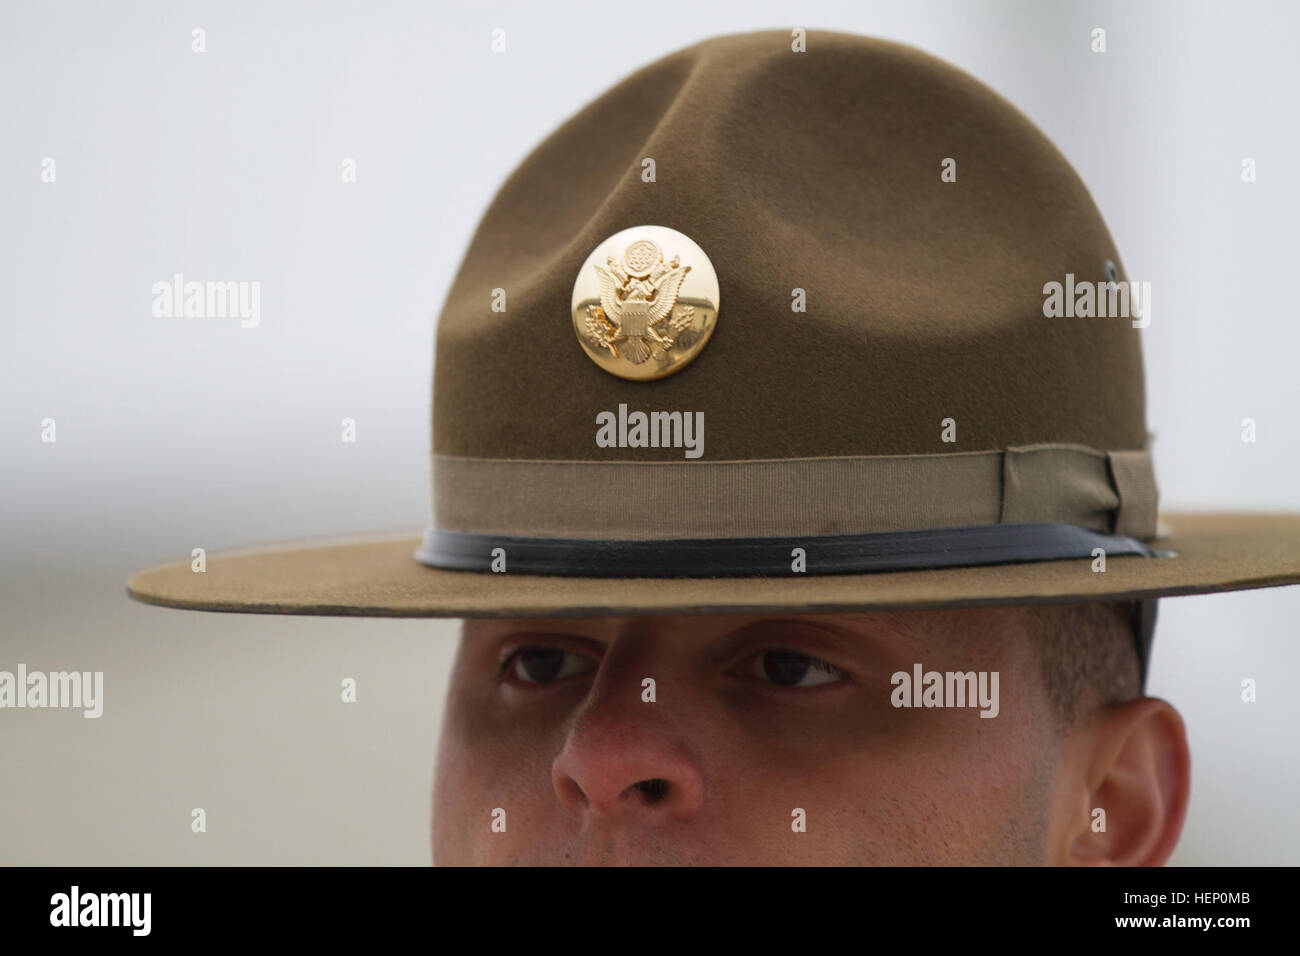 blue disk drill sergeant hat meaning